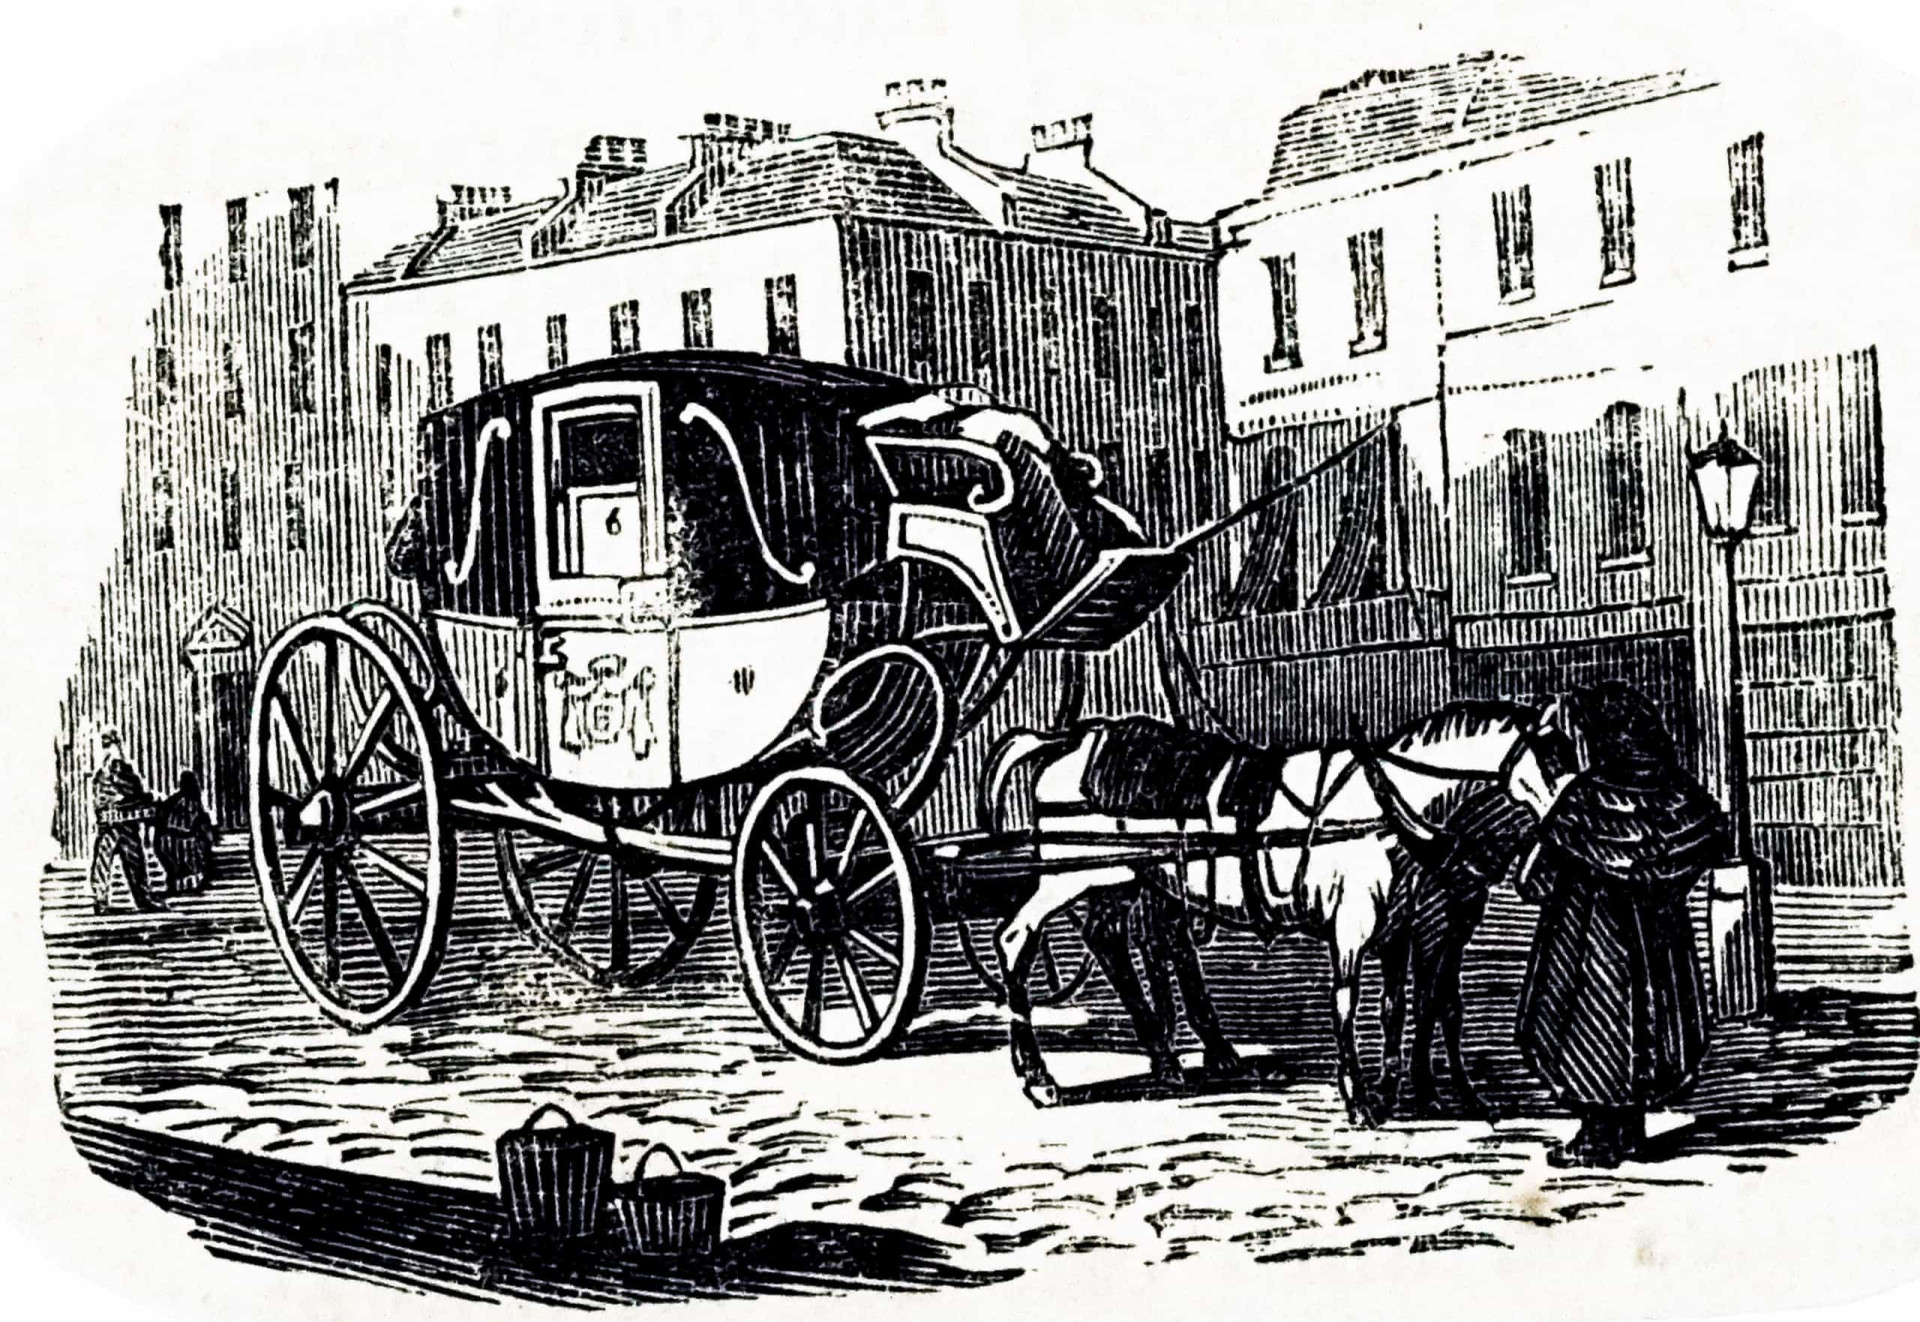 <p>The horse-drawn cabs known as hackney carriages appeared on London's streets in the late 17th century. They would eventually be replaced by the more popular Hansom cab. Today's iconic London black taxis are still sometimes called hackney carriages.</p><p><a href="https://www.msn.com/en-us/community/channel/vid-7xx8mnucu55yw63we9va2gwr7uihbxwc68fxqp25x6tg4ftibpra?cvid=94631541bc0f4f89bfd59158d696ad7e">Follow us and access great exclusive content every day</a></p>